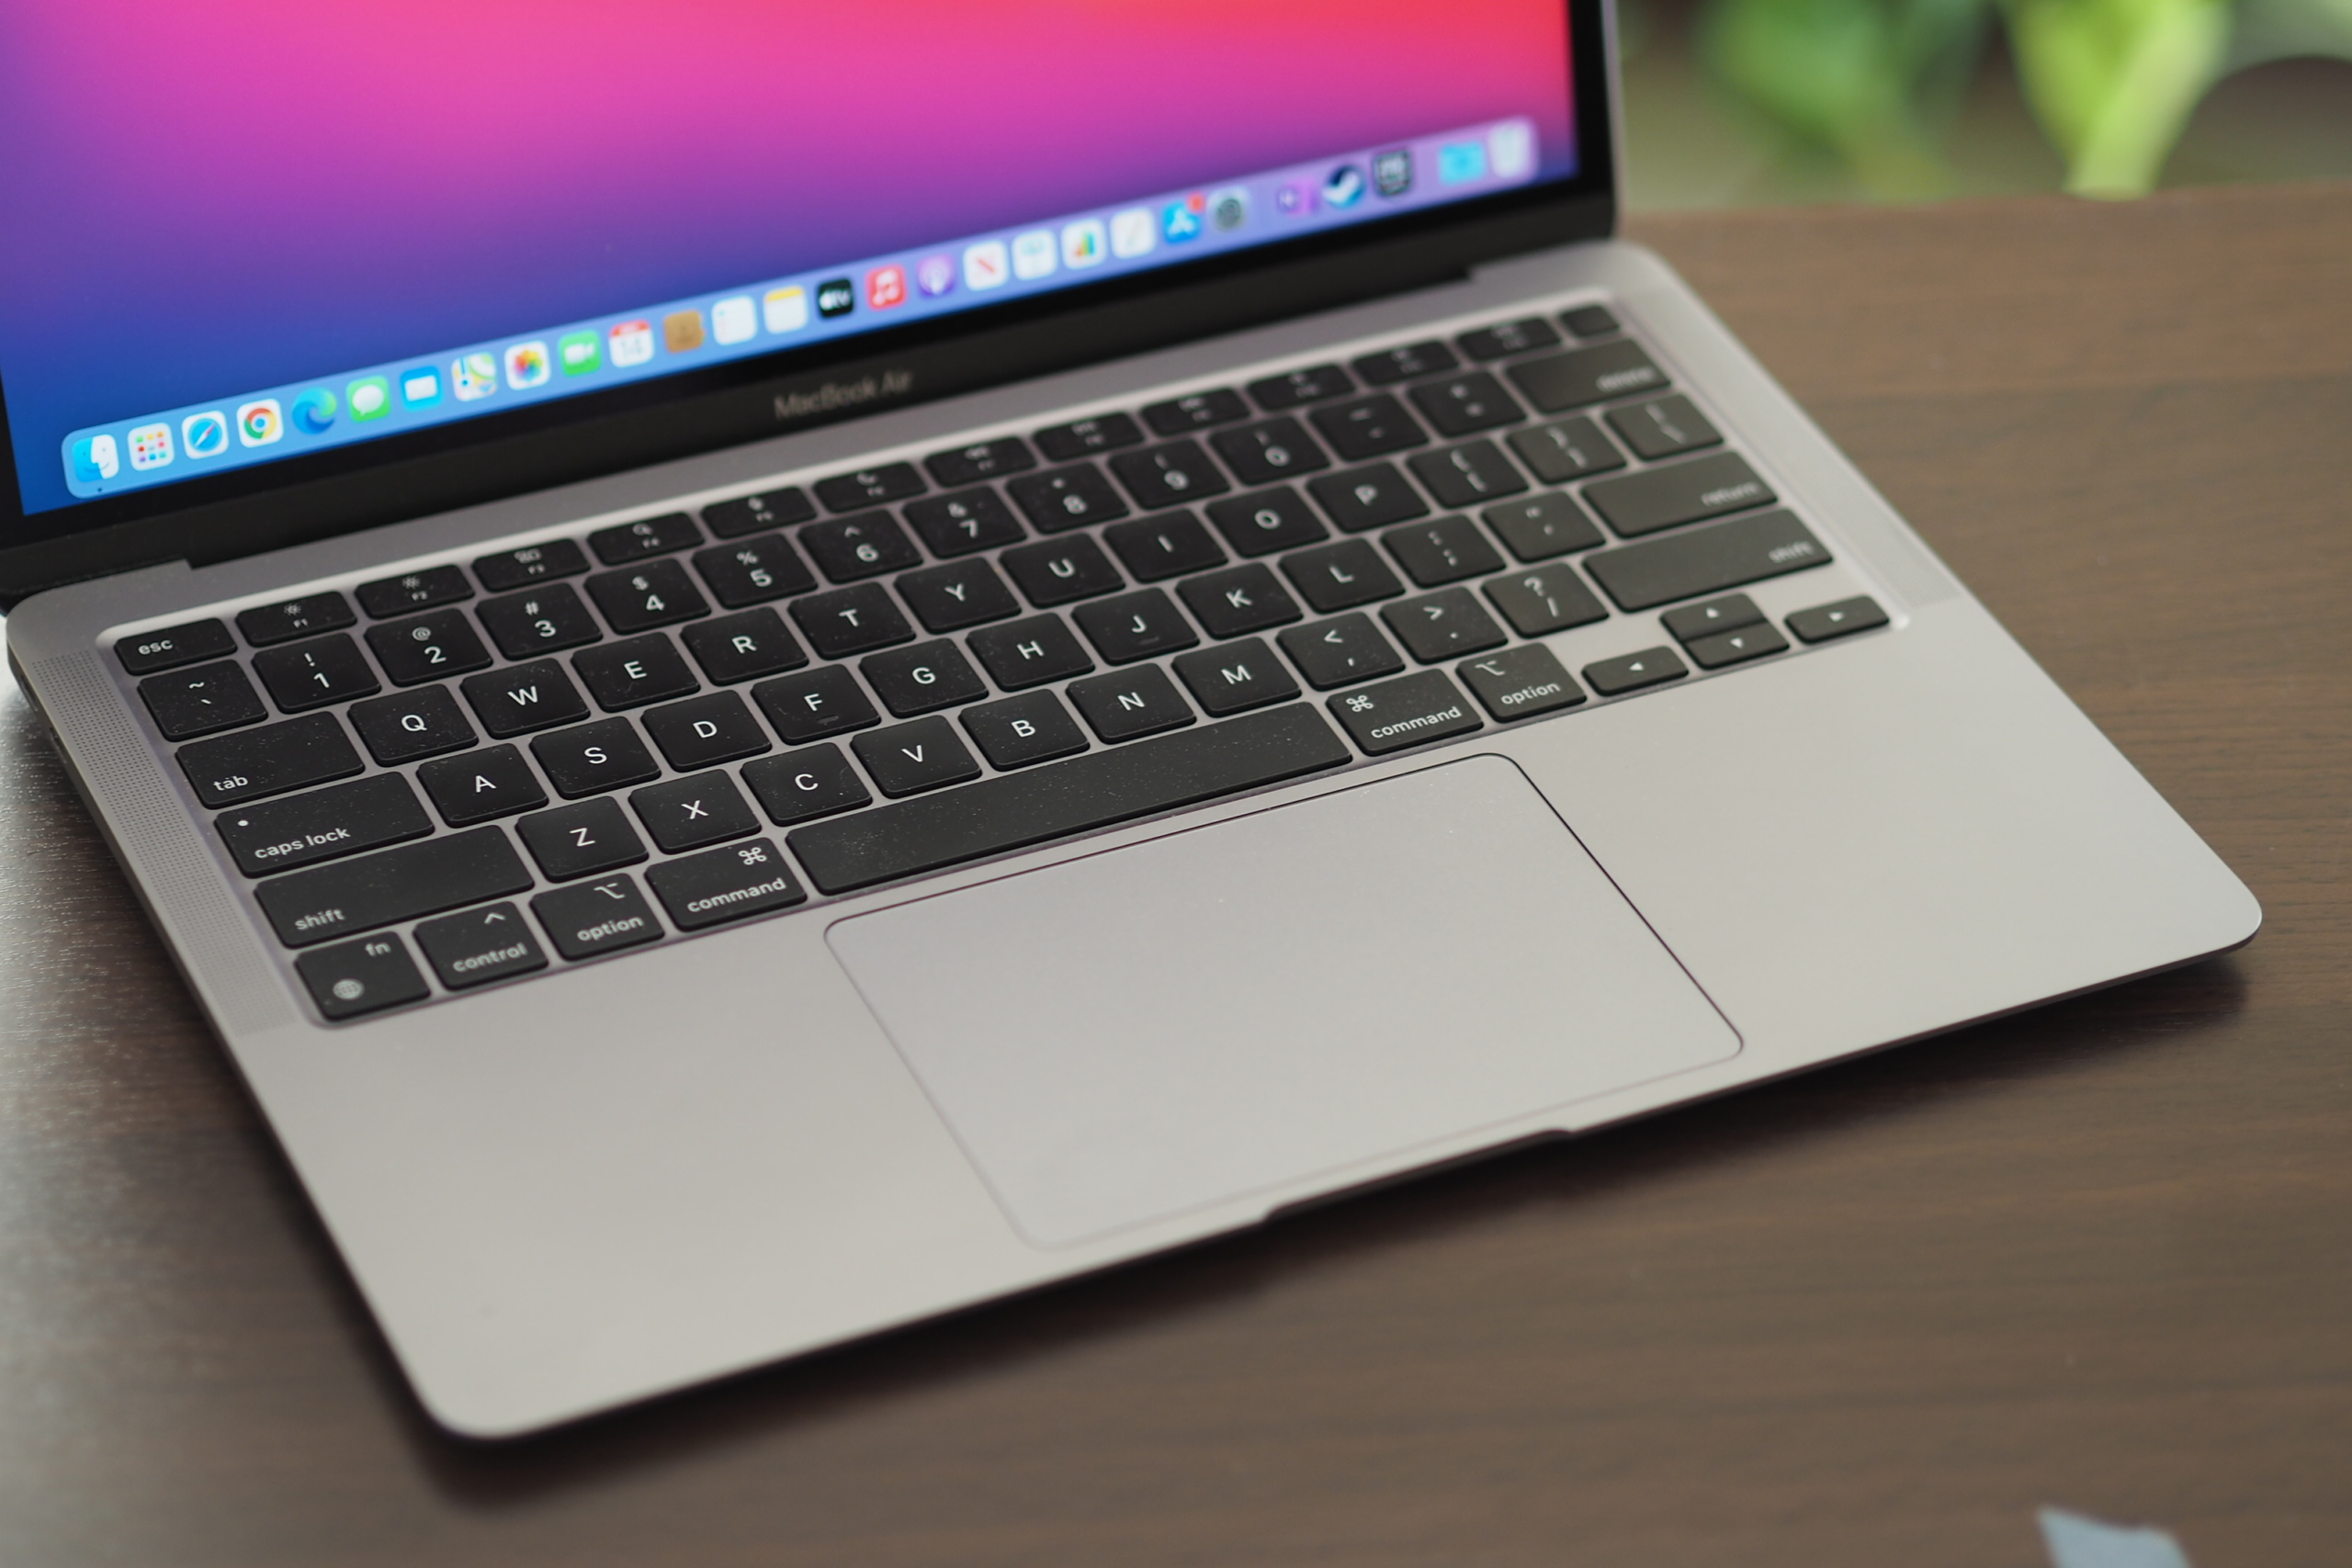 Best MacBook Deals: Save Up to $300 on the MacBook Air and MacBook